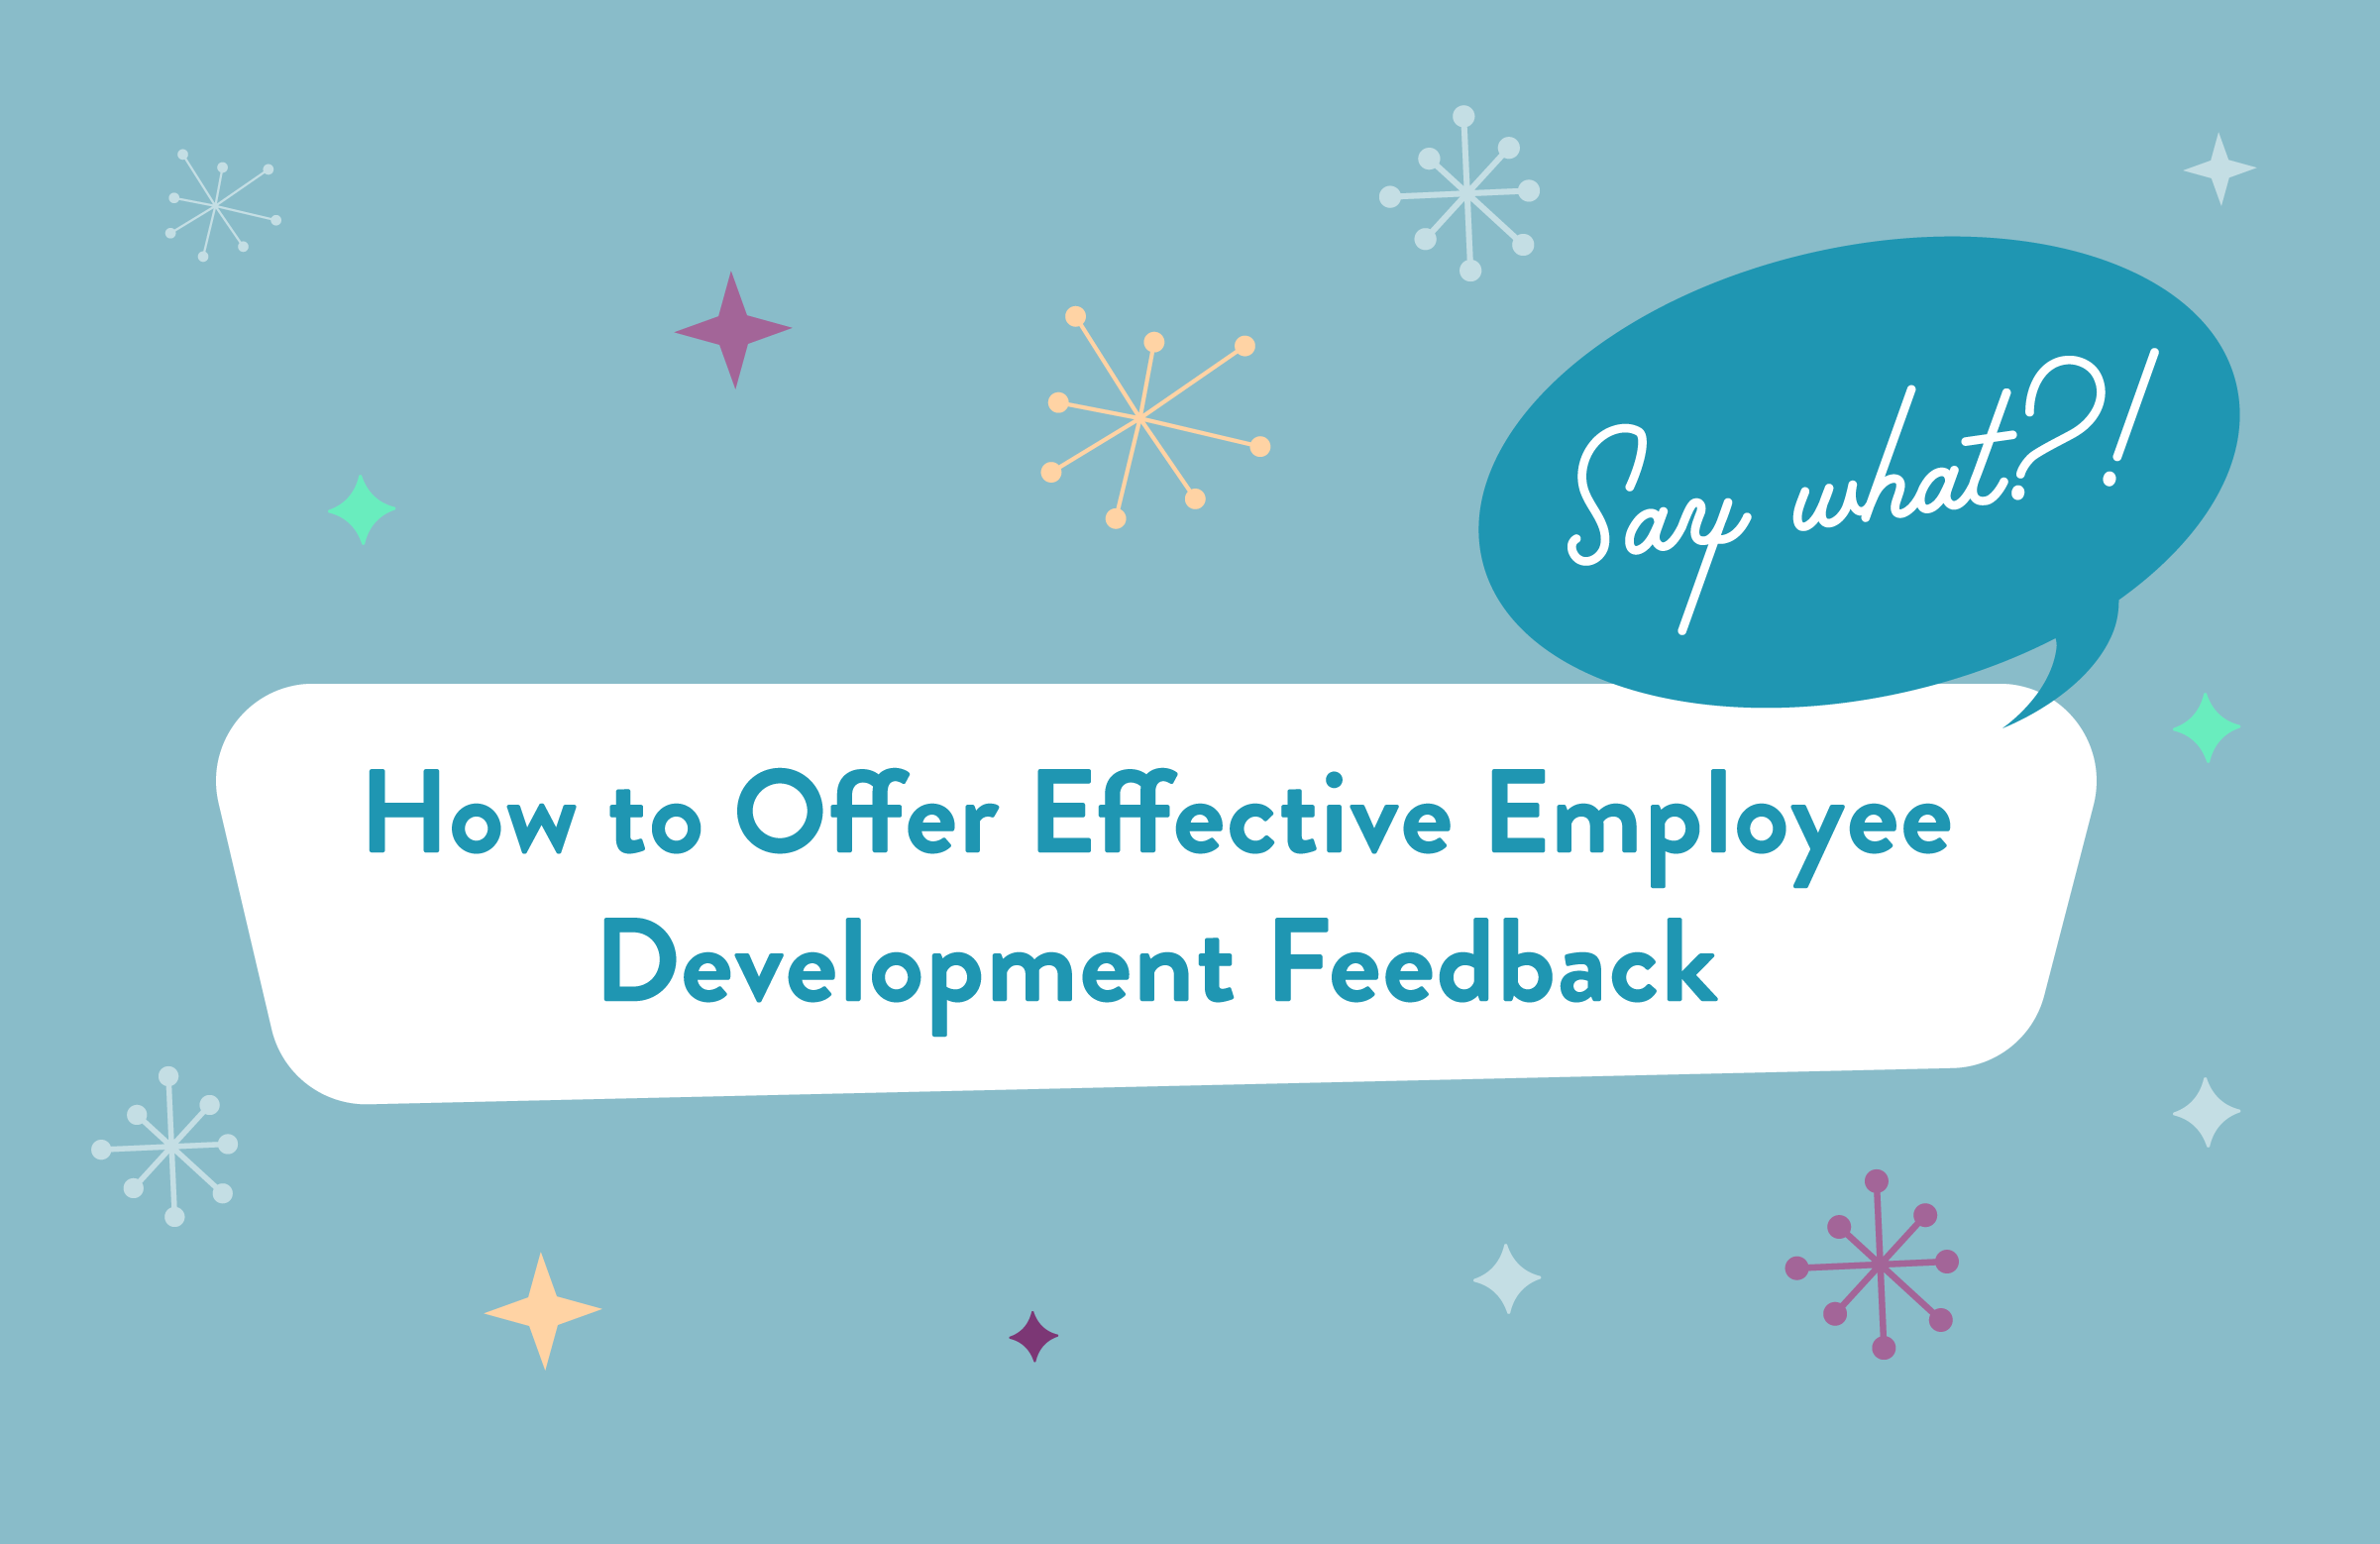 “Say What?” — How to Offer Effective Employee Development Feedback